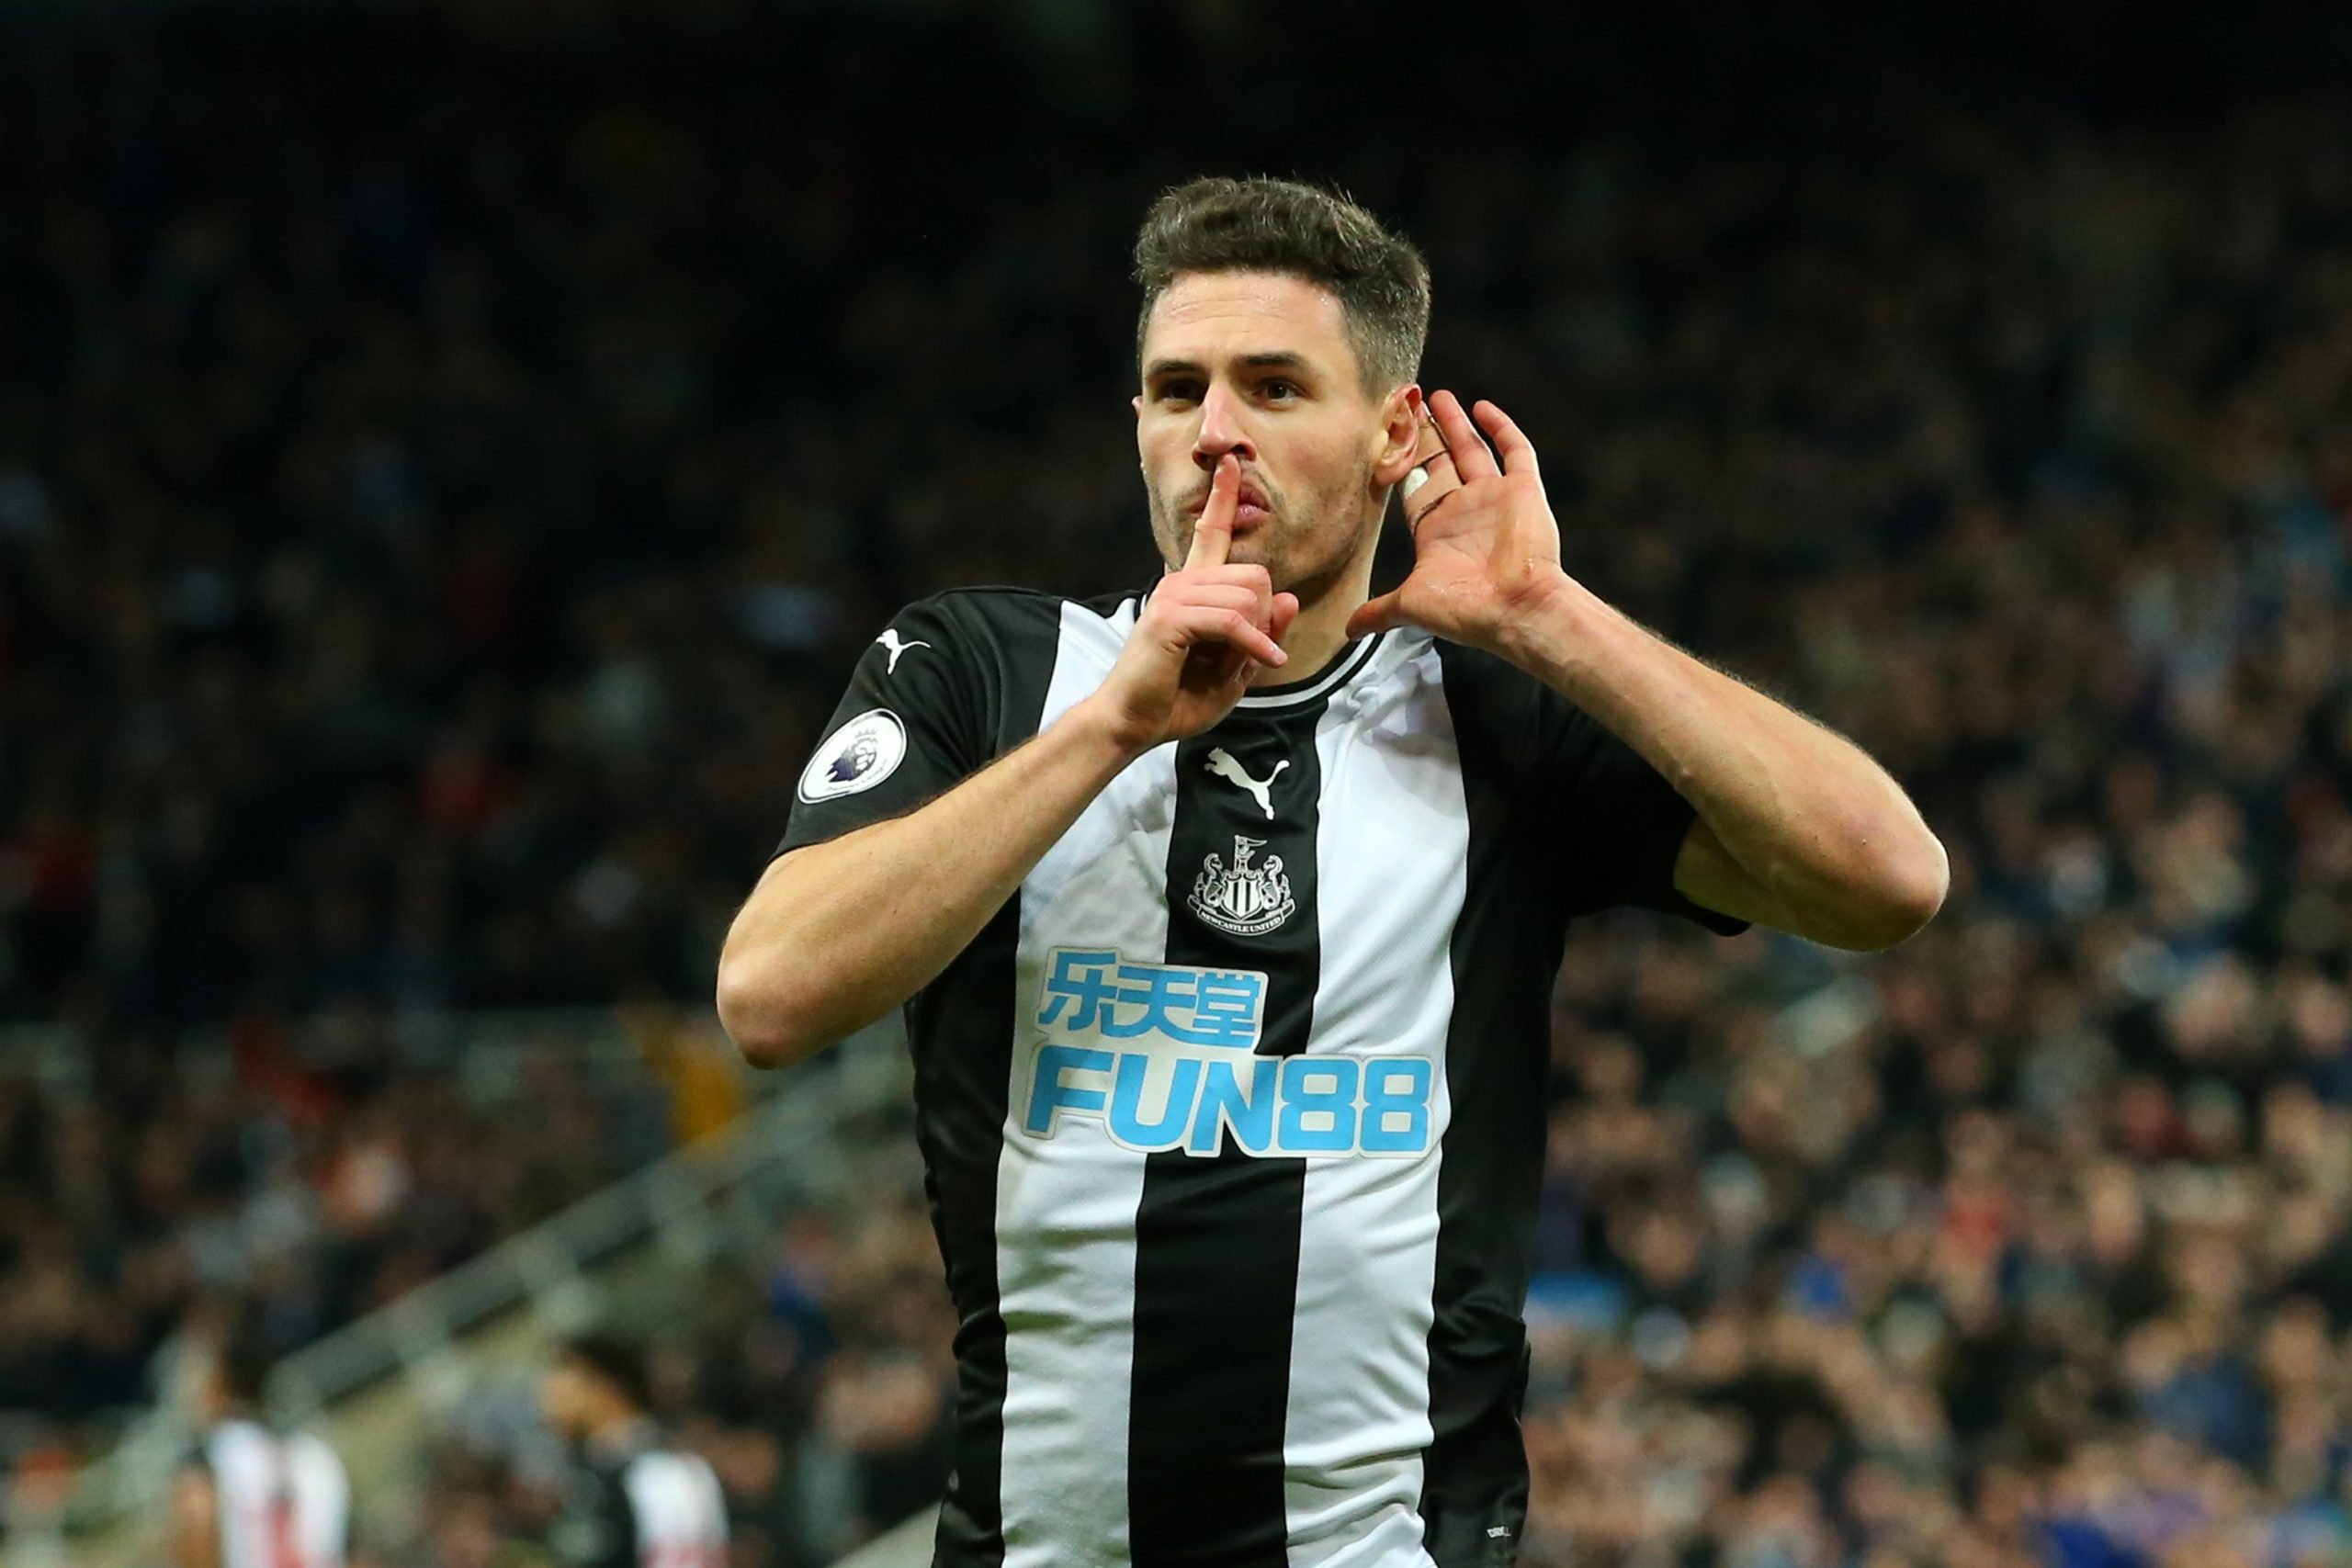 Newcastle United's Schar may turn down contract extension (Schar is seen in the picture)